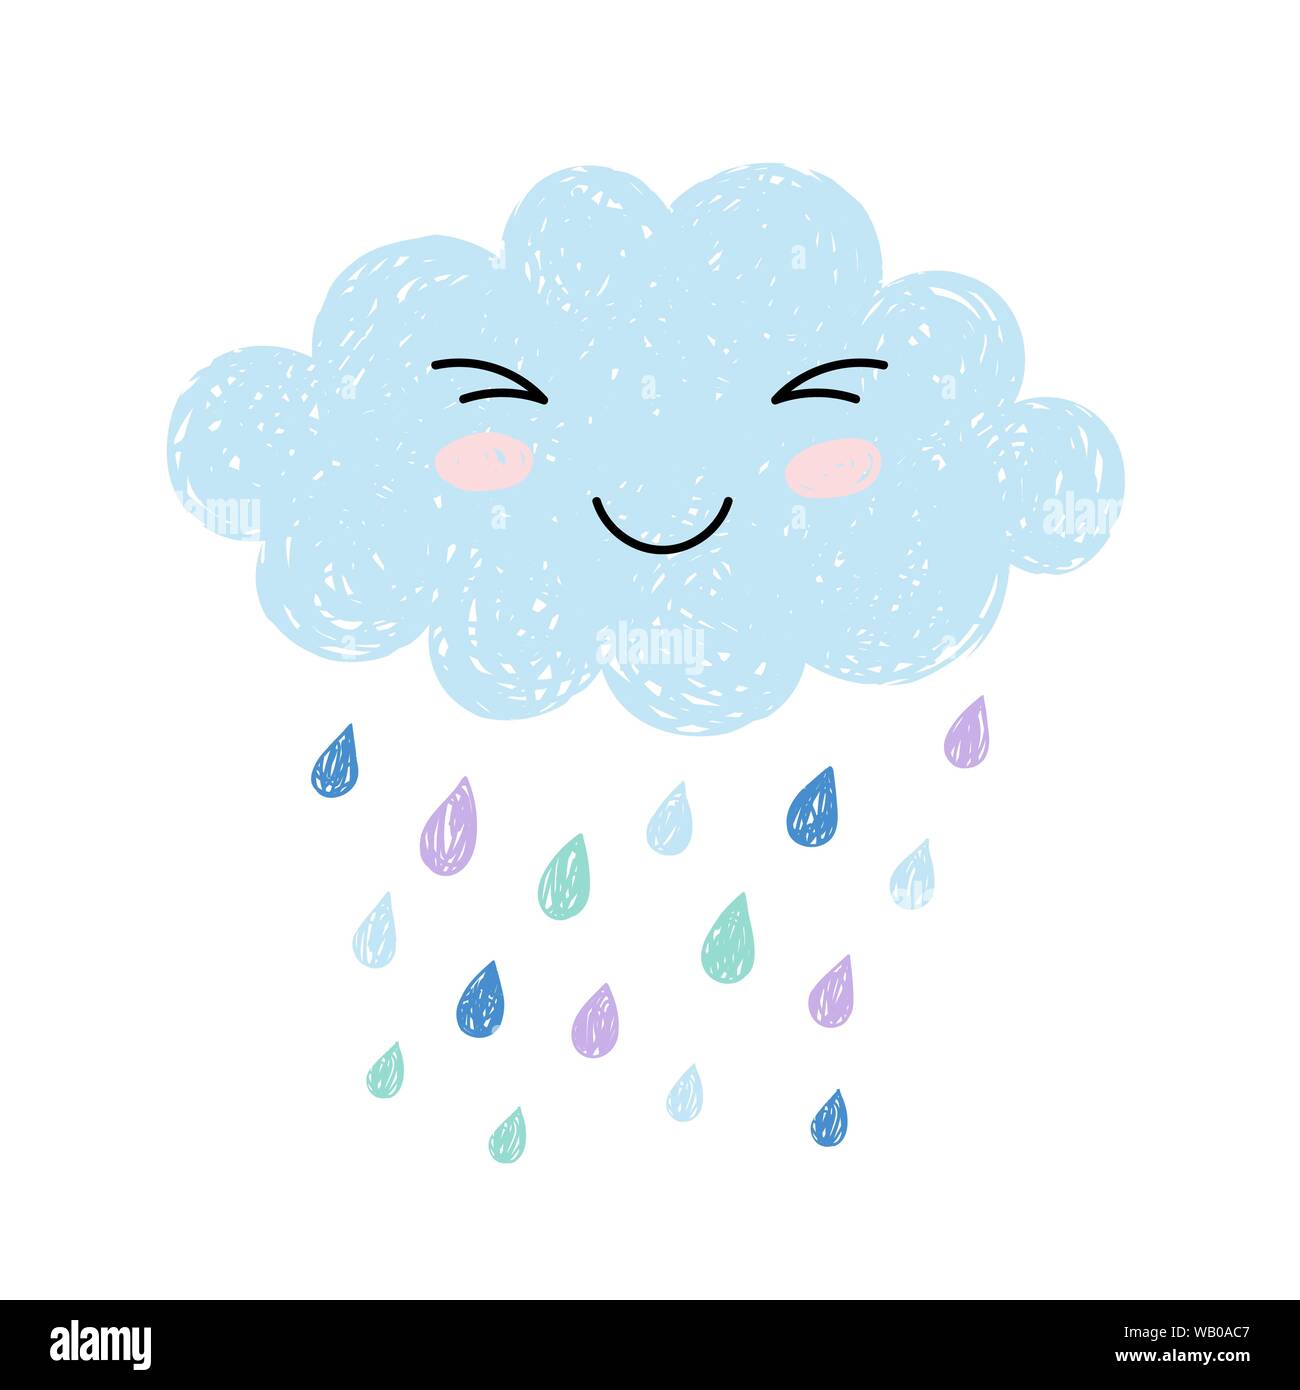 Cute happy cartoon kawaii cloud on blue background with rain drops. Dreaming hand drawn cloud vector illustration for posters, cards or t-shirt prints Stock Vector